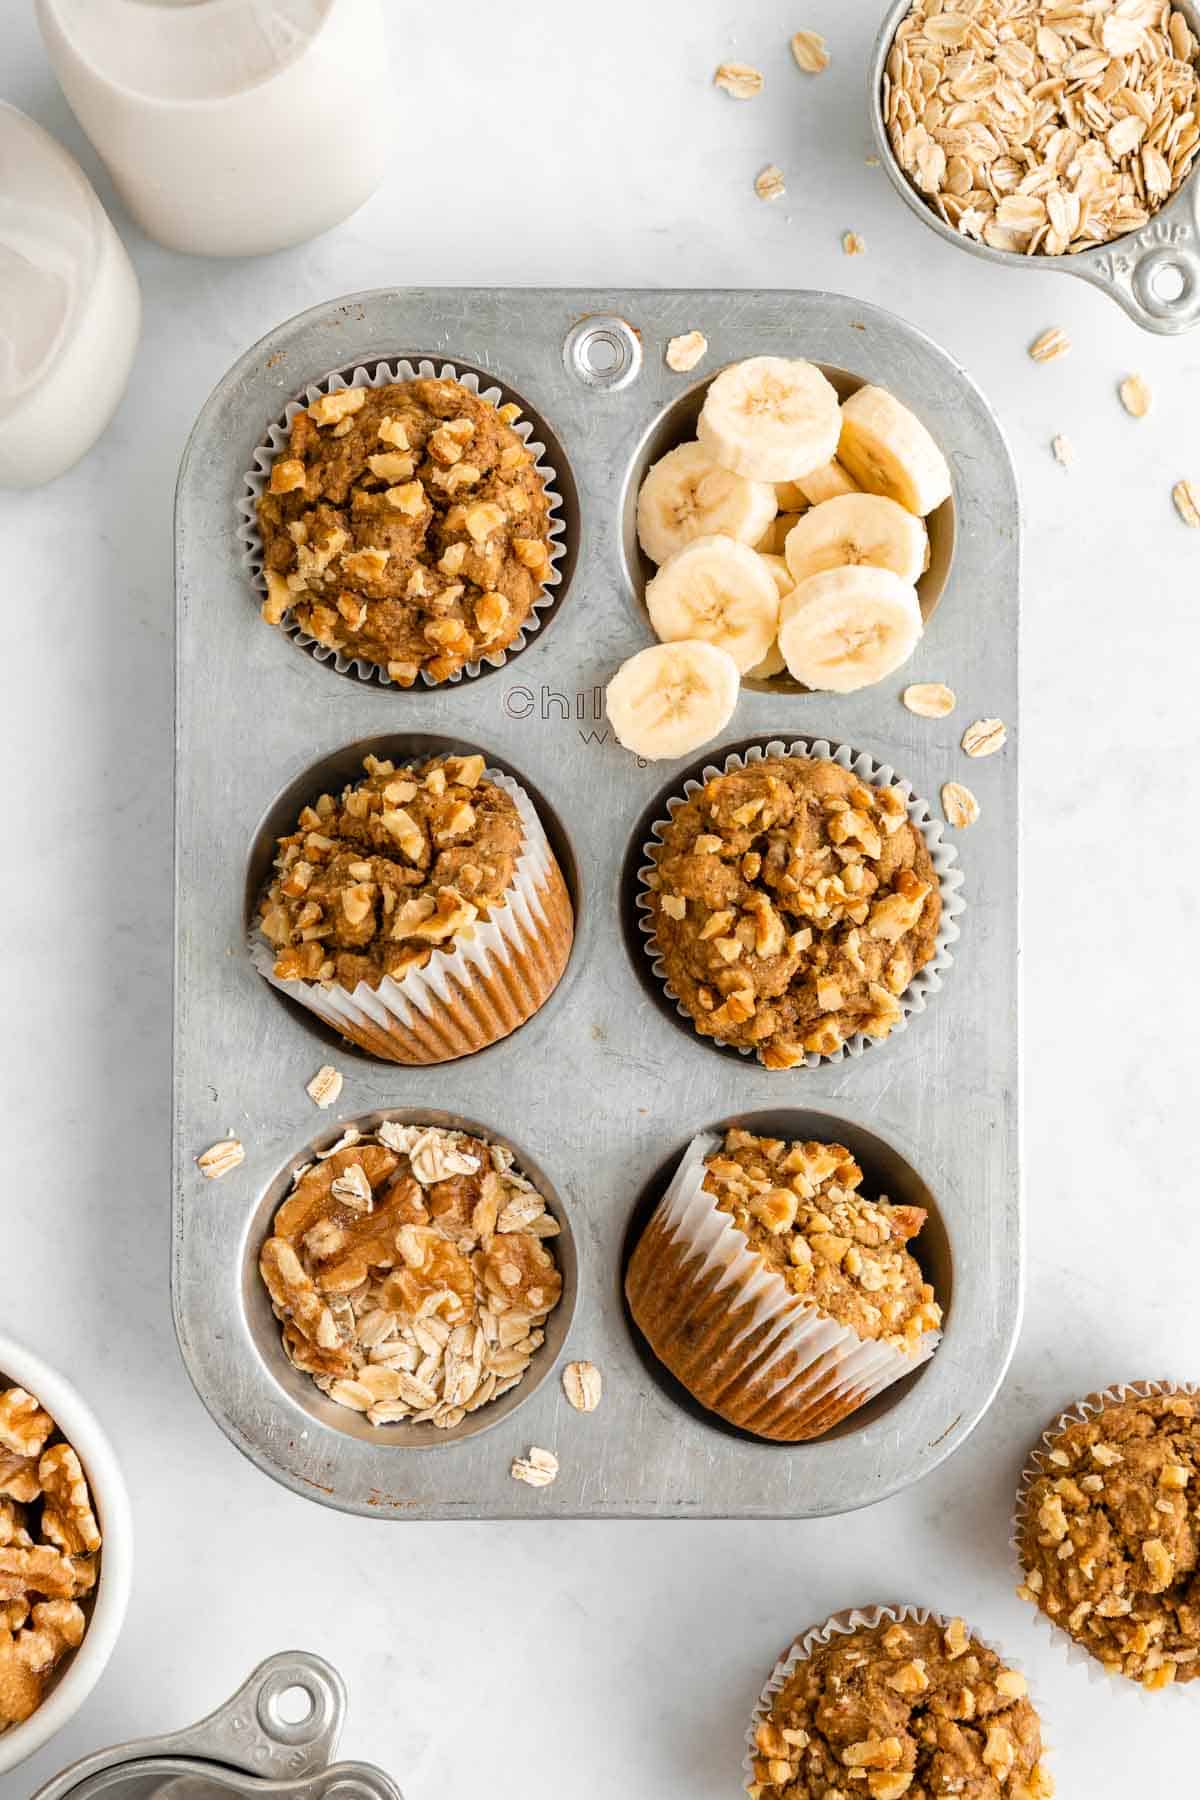 healthy banana nut muffins in a vintage muffin tin with walnuts, oats, and sliced banana